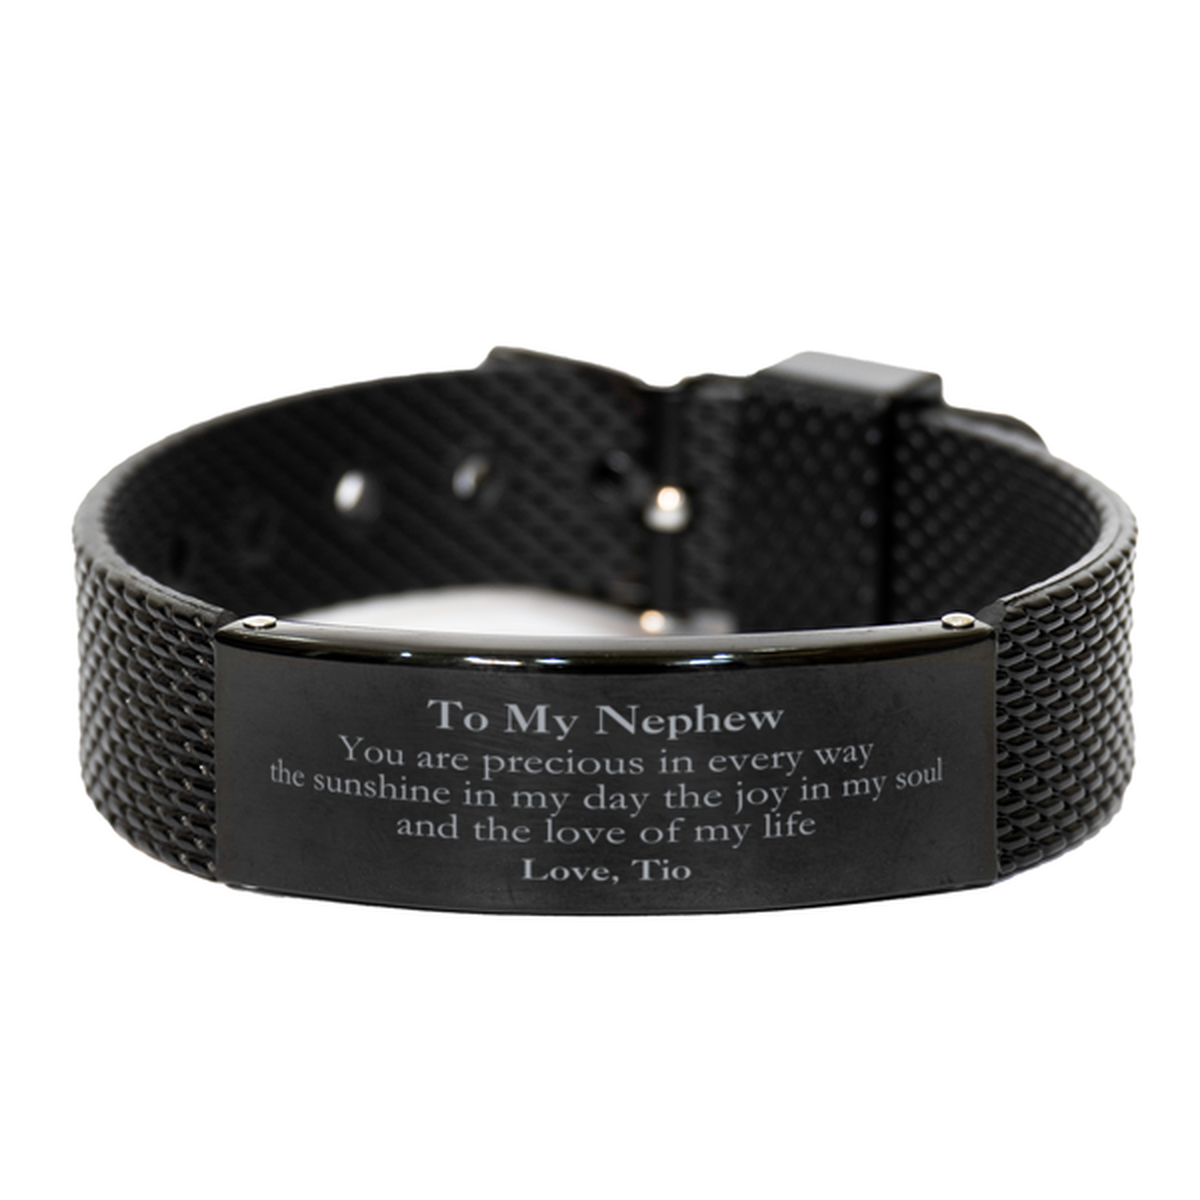 Graduation Gifts for Nephew Black Shark Mesh Bracelet Present from Tio, Christmas Nephew Birthday Gifts Nephew You are precious in every way the sunshine in my day. Love, Tio